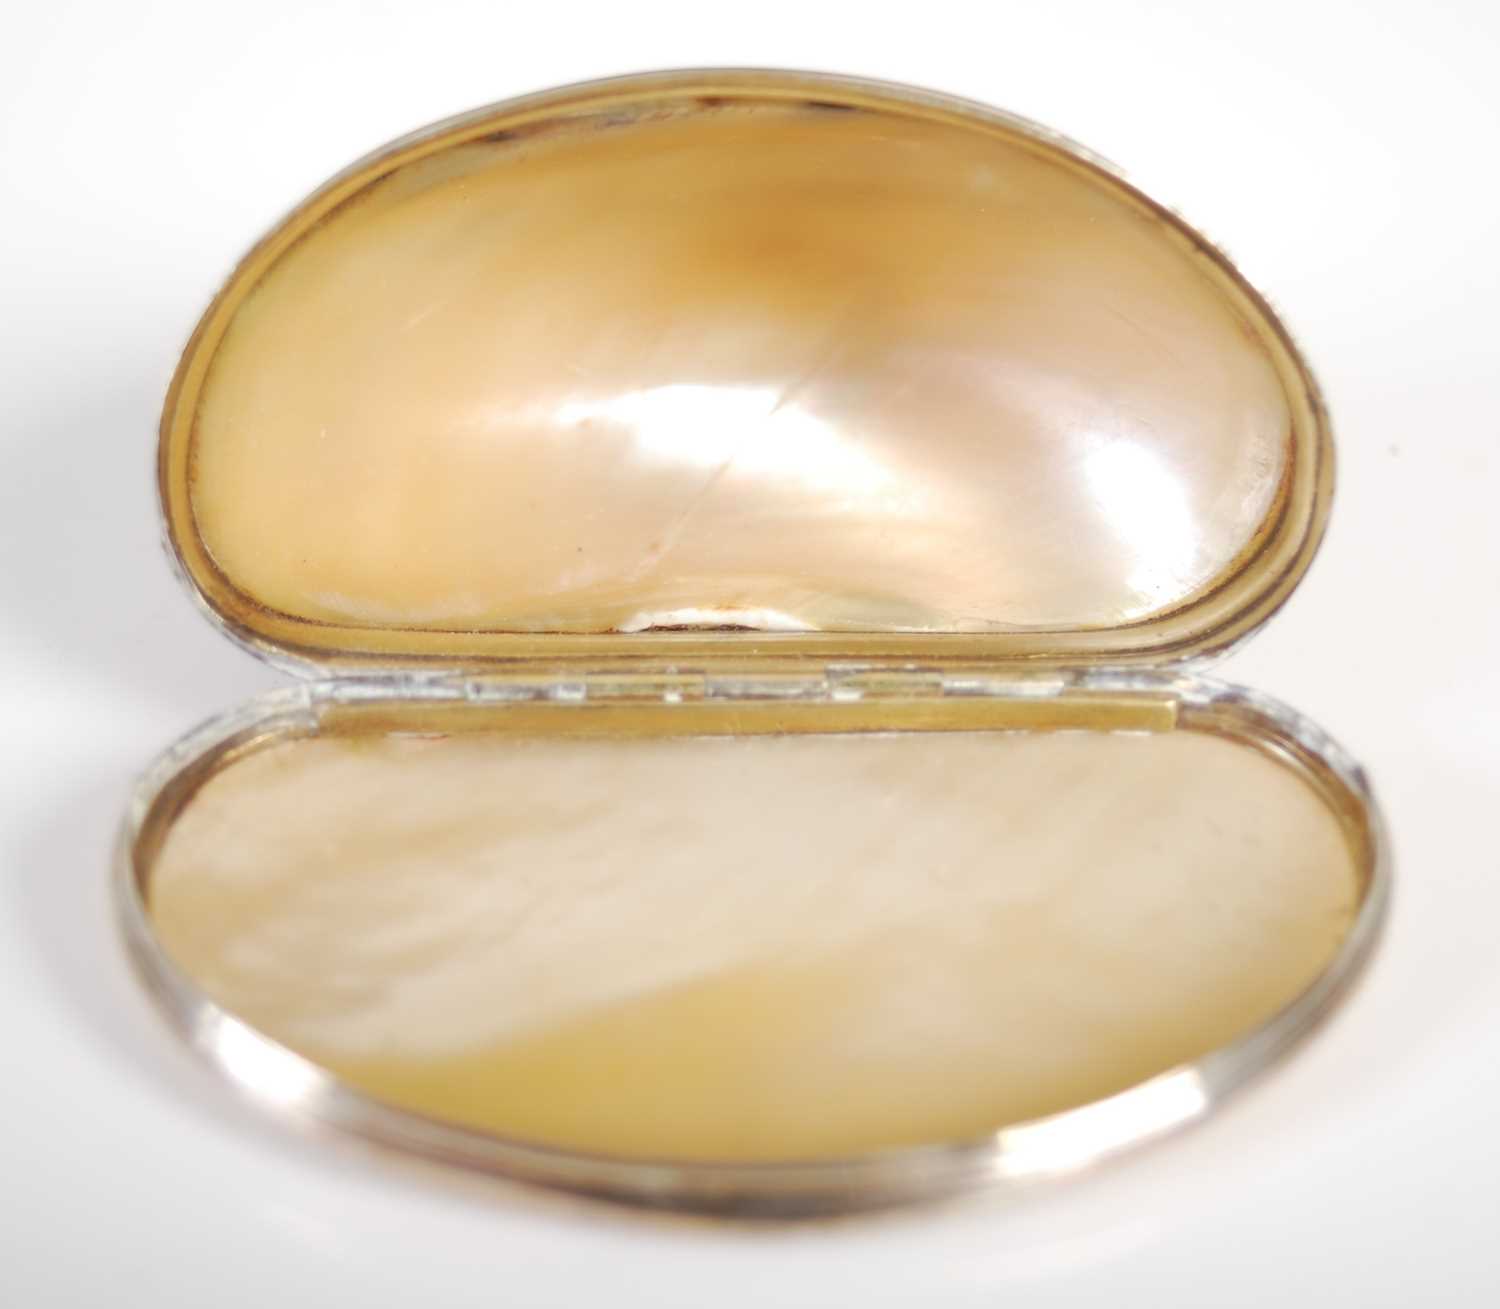 A Cittarium Pica ‘magpie’ shell snuff box, carved to produce a decorative design, with reeded silver - Image 3 of 3